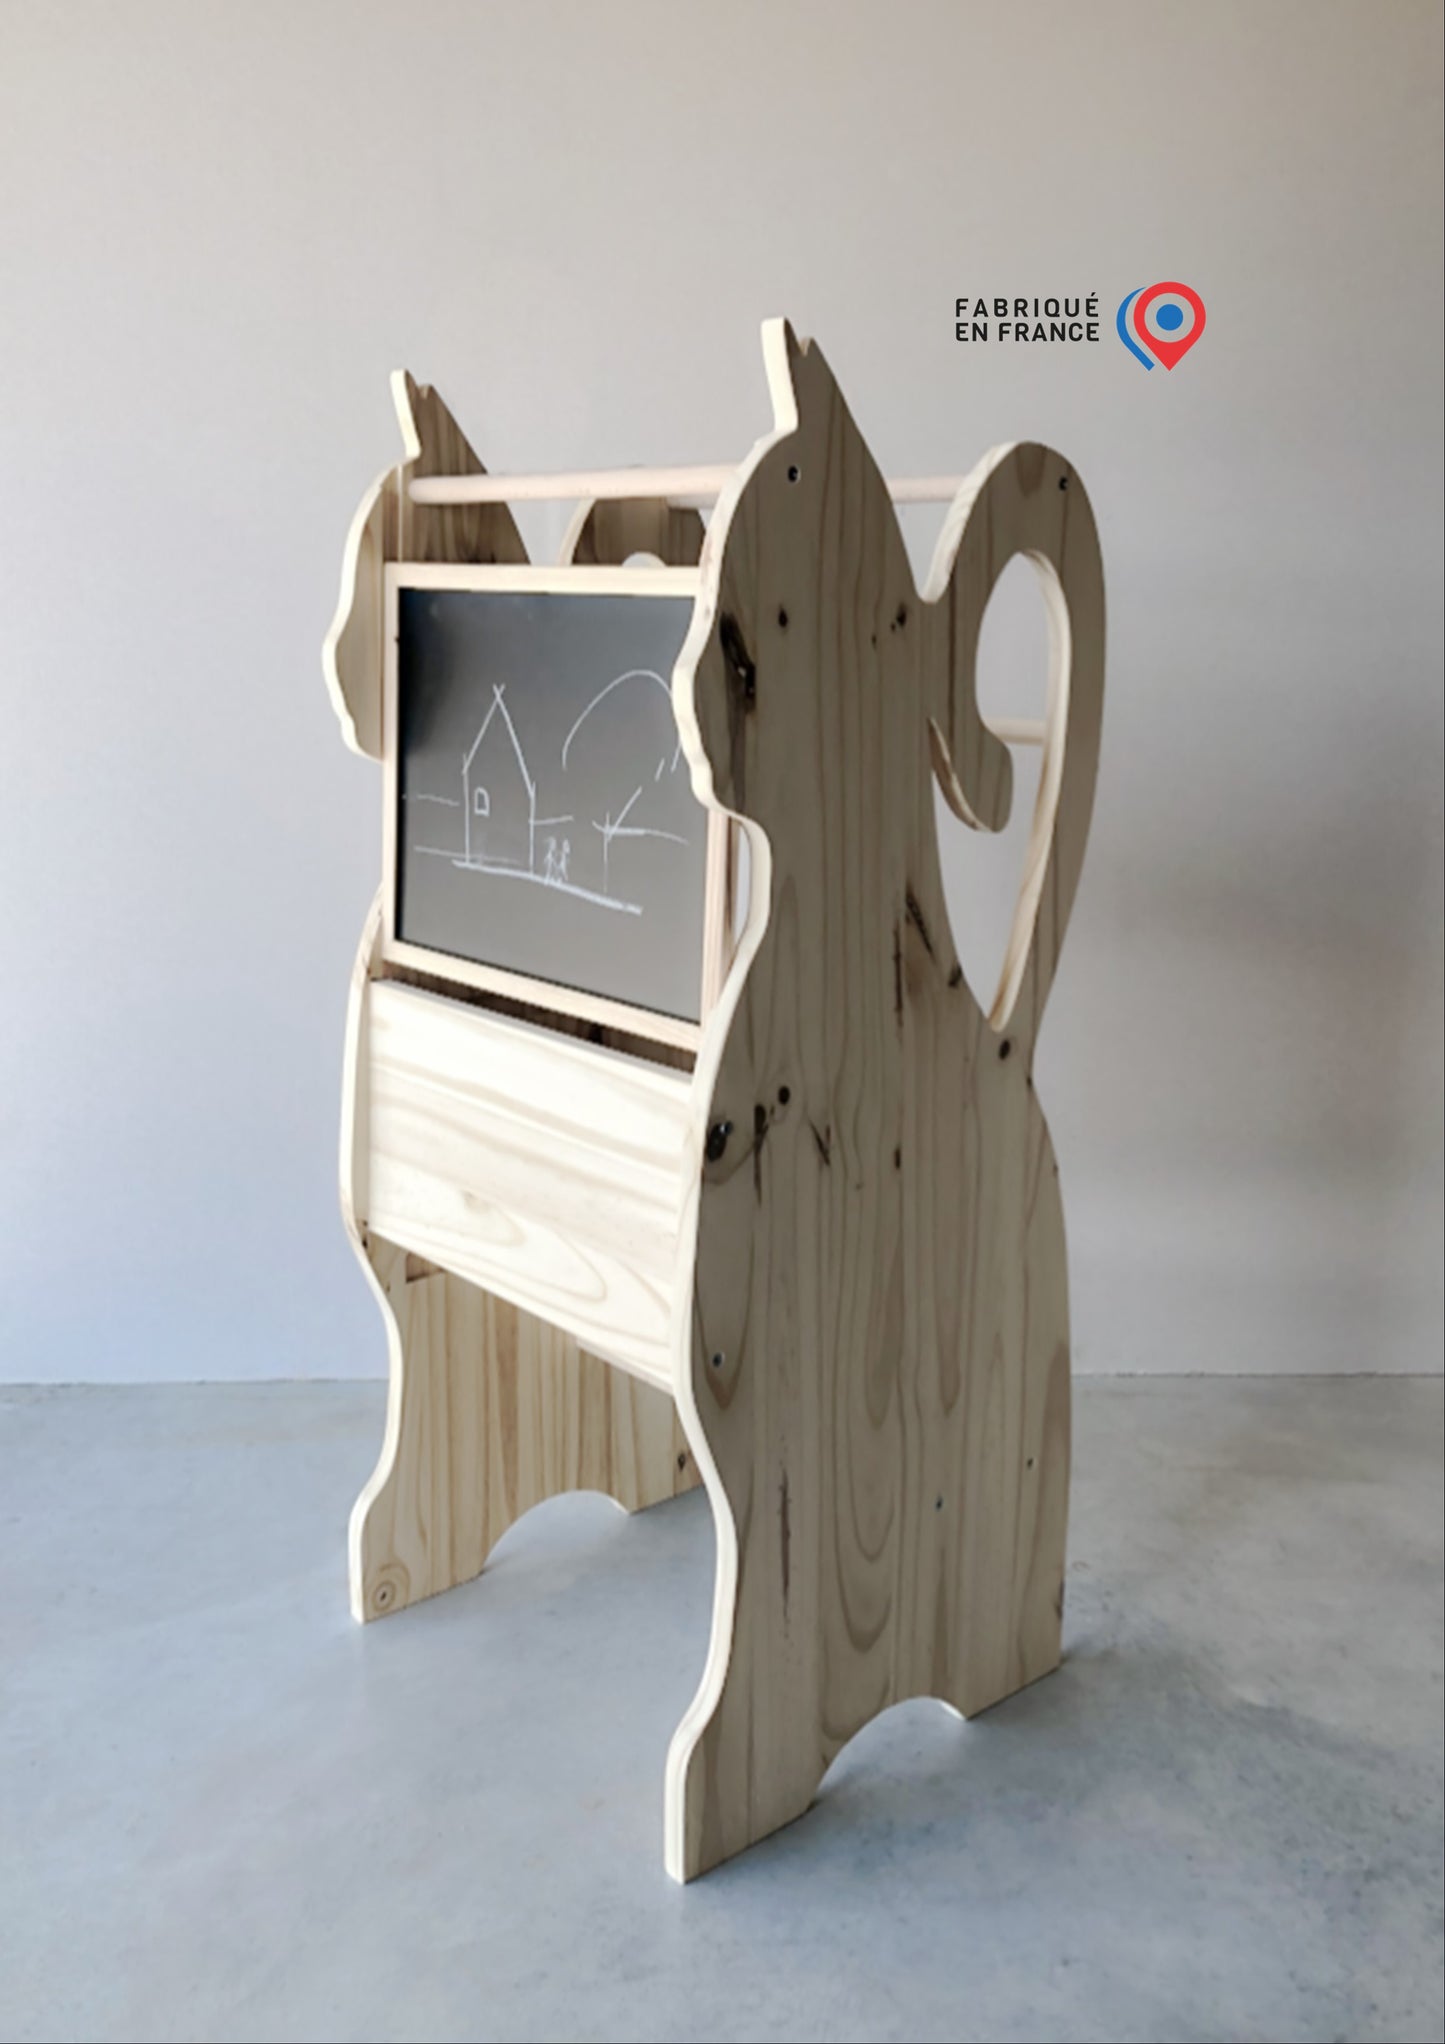 Adjustable Montessori-inspired Cat design learning tower with removable board